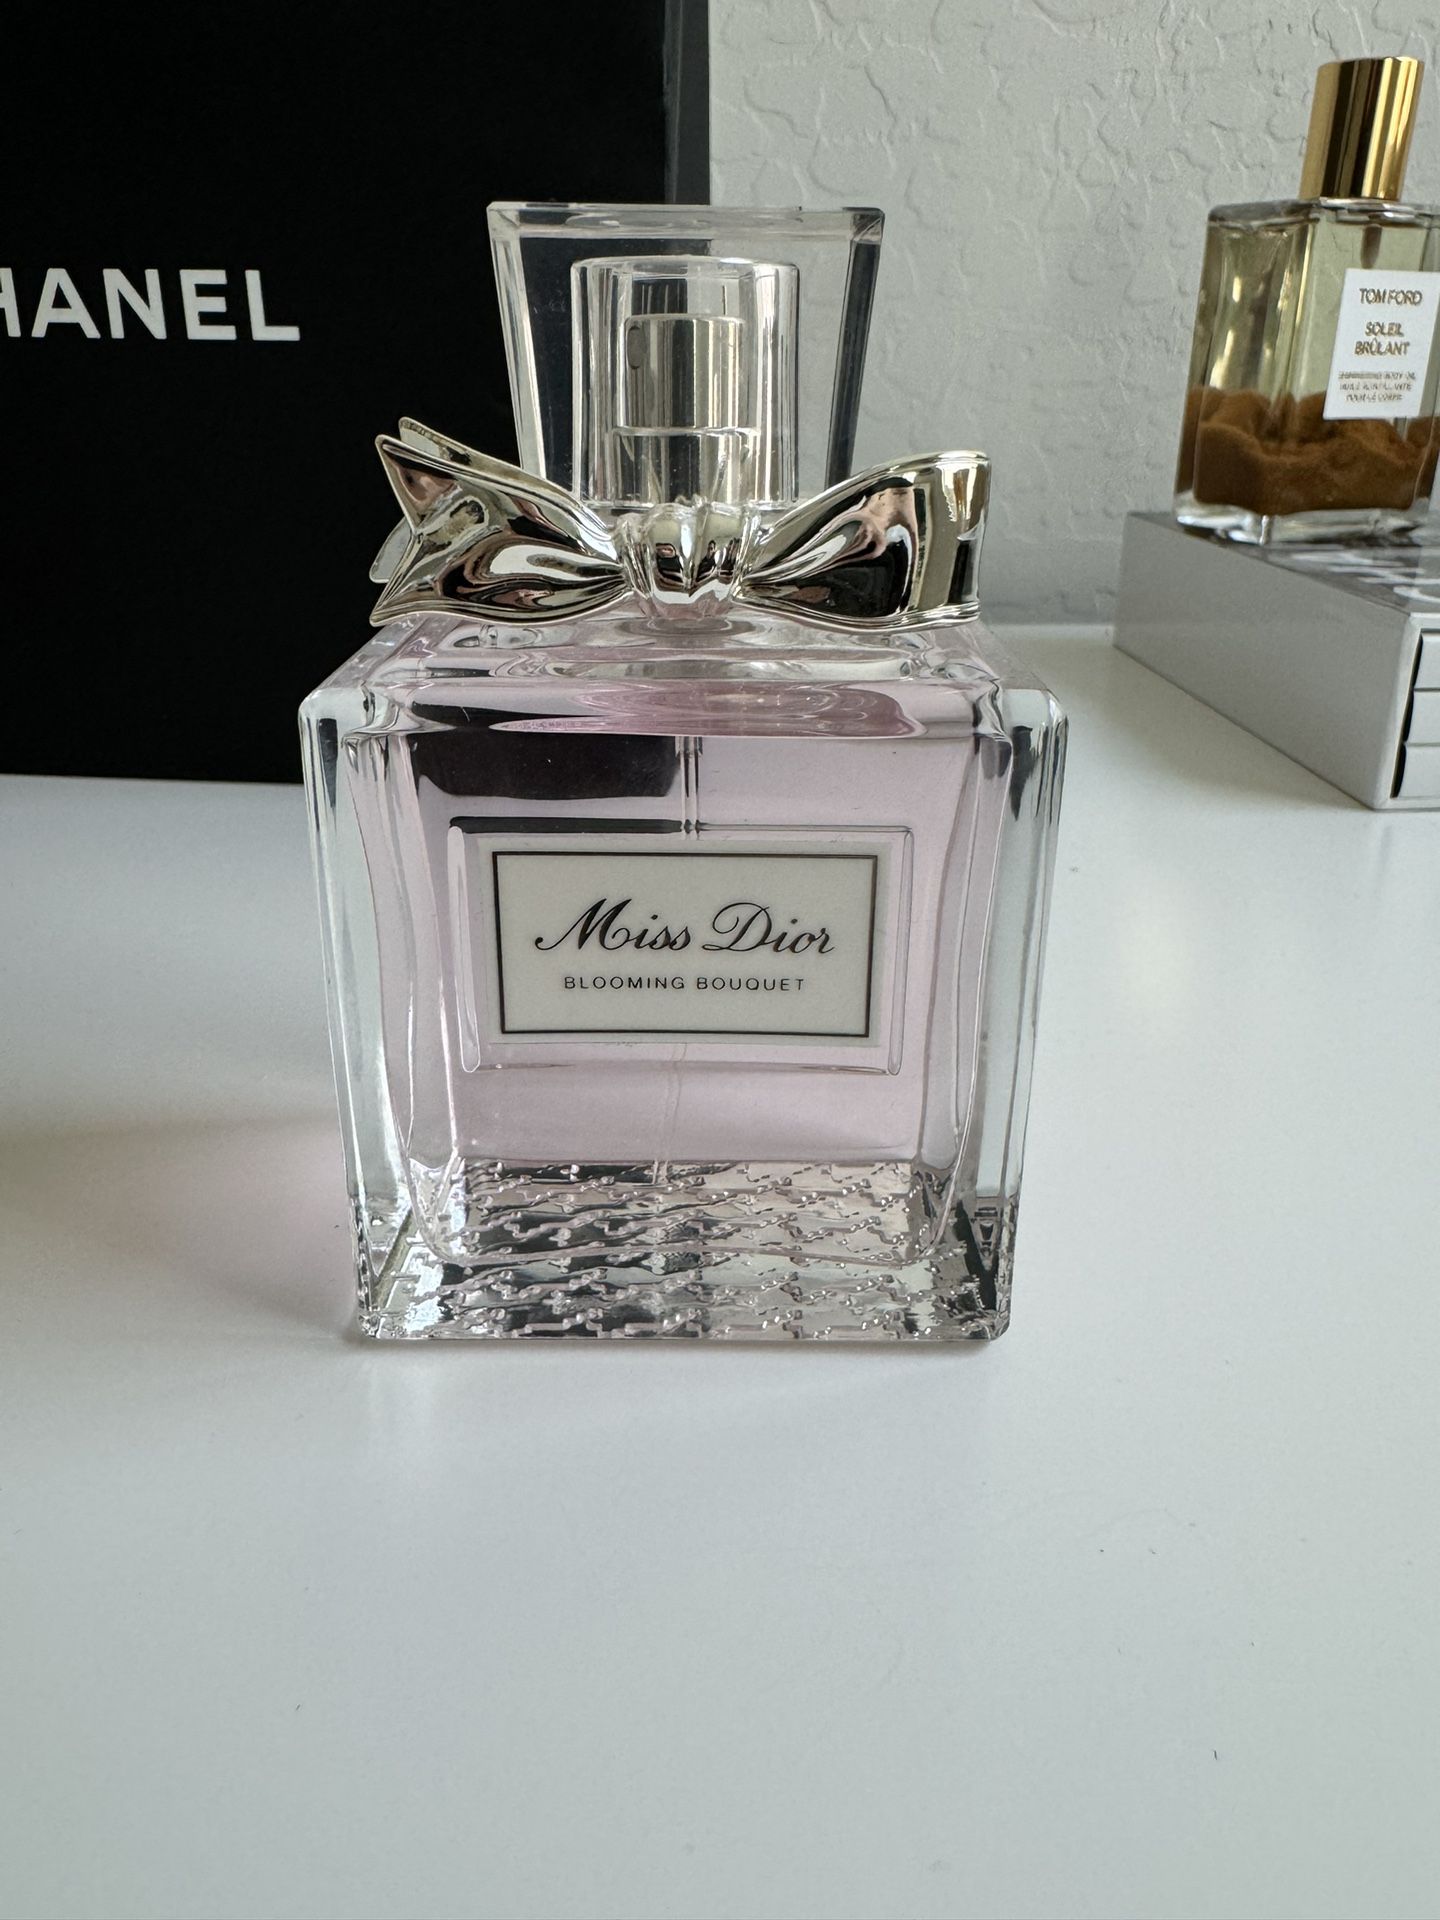 Miss Dior “Bloomimg Bouquet” Perfume